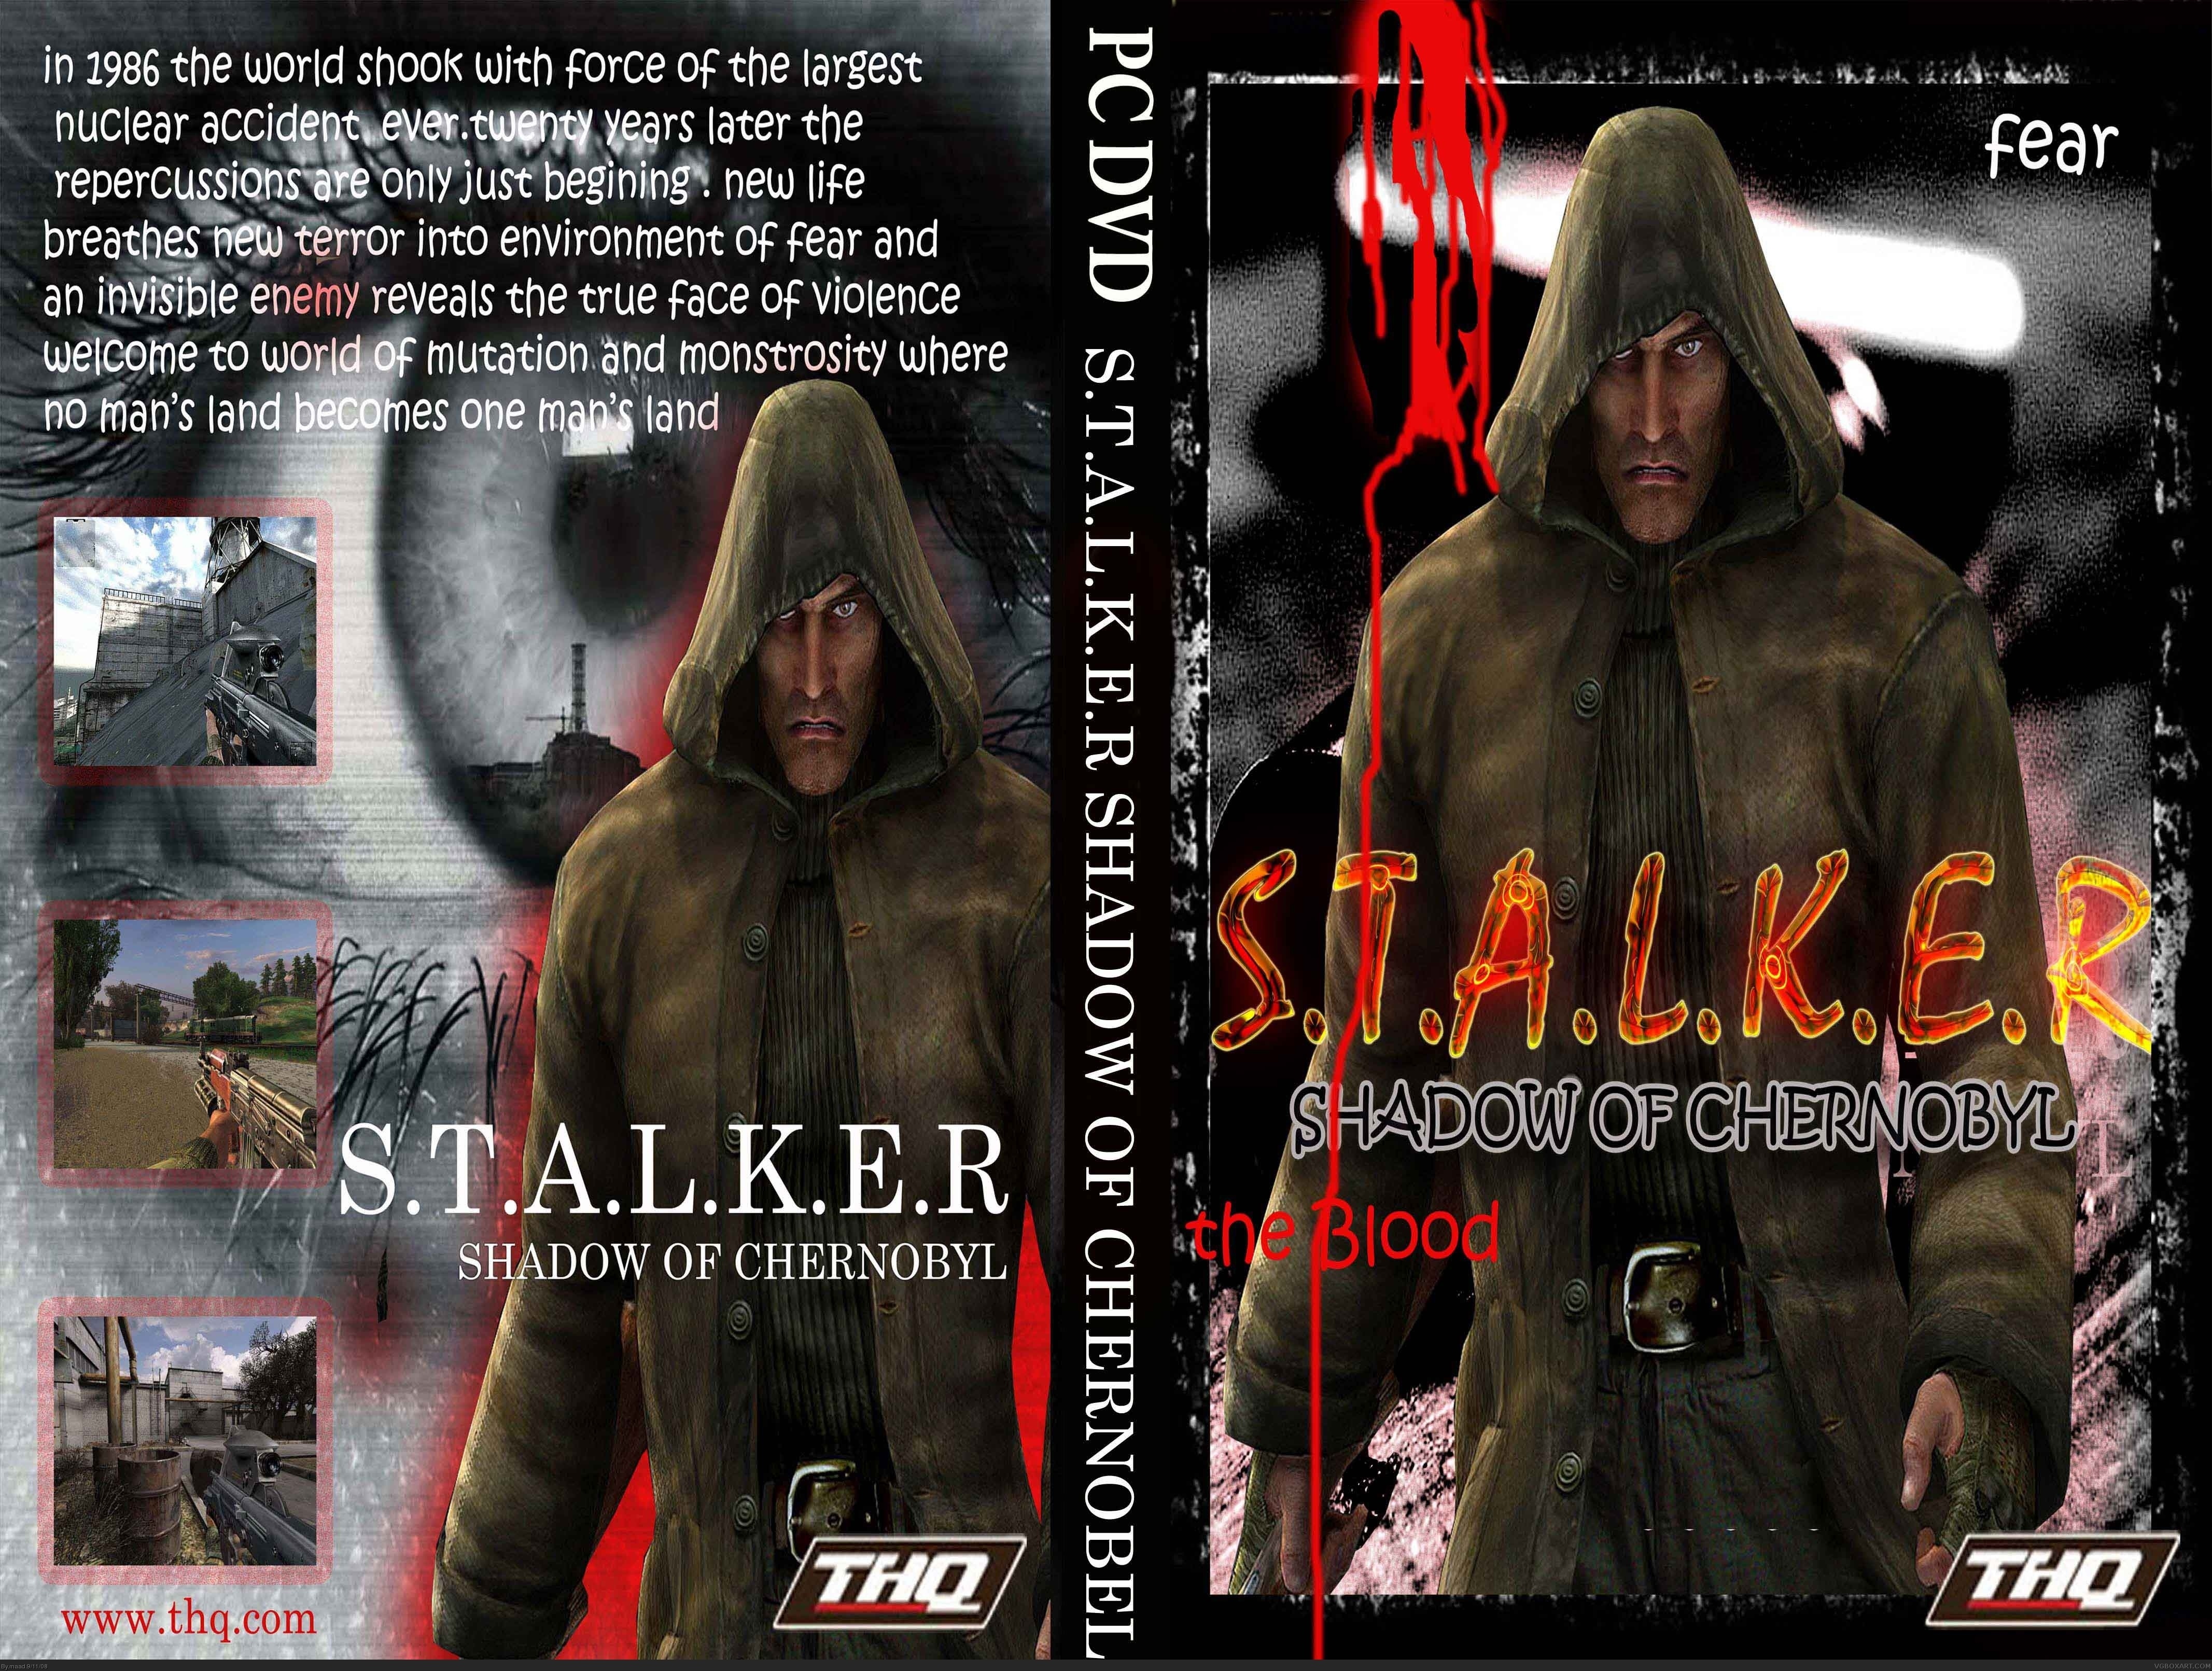 S.T.A.L.K.E.R. Shadow of Chernobyl box cover